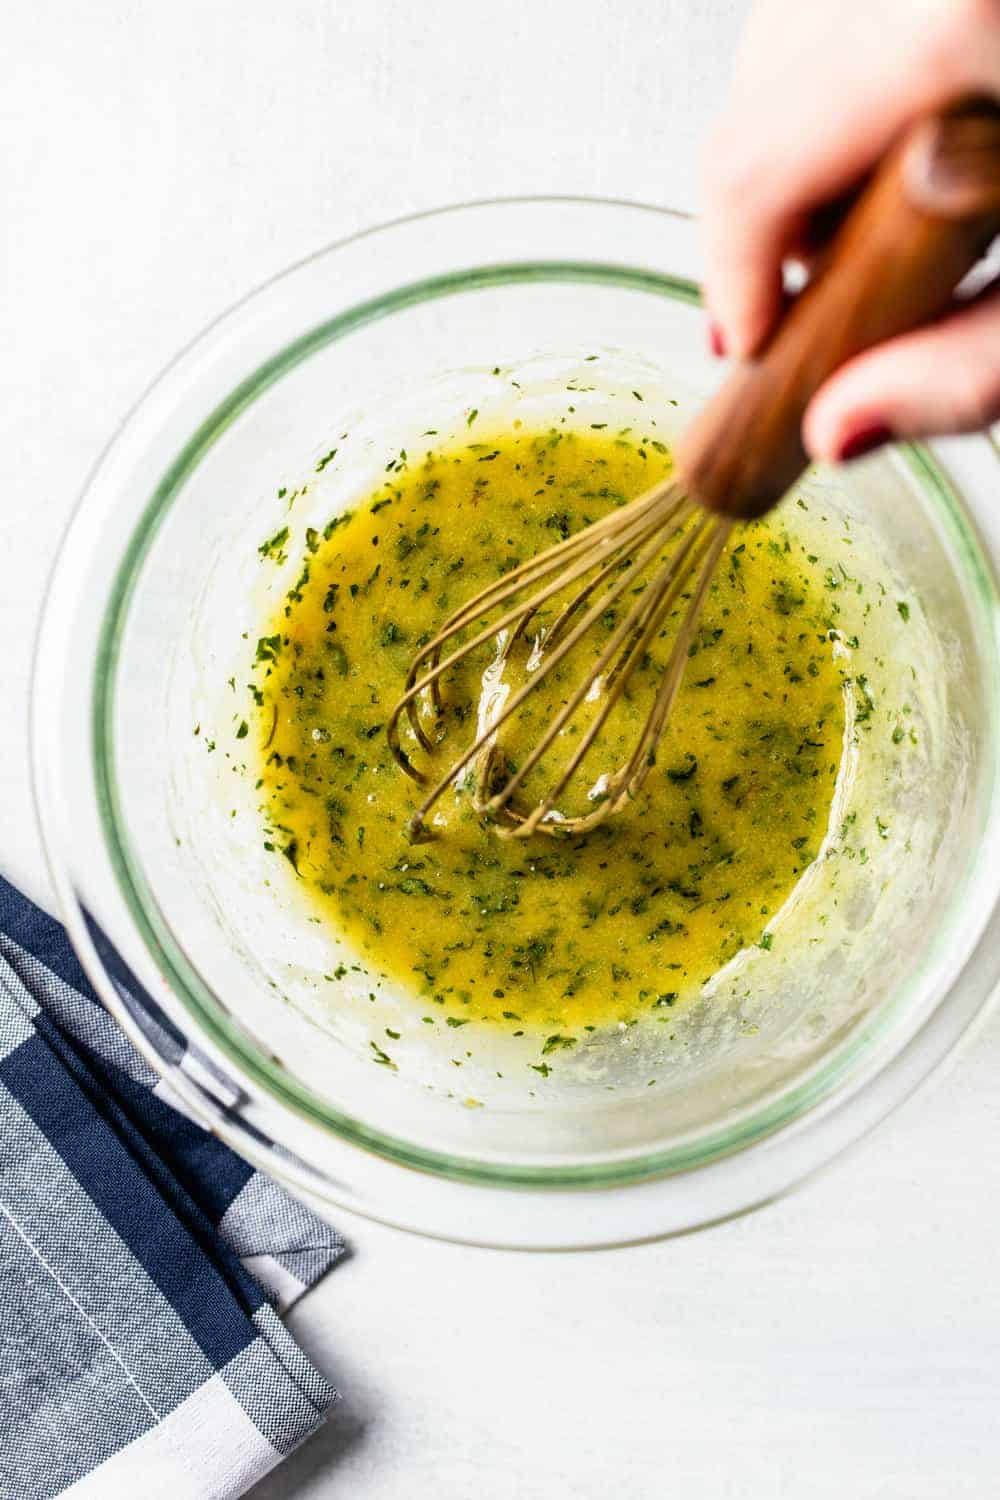 Hand whisking melted butter and herbs together in a small glass bowl